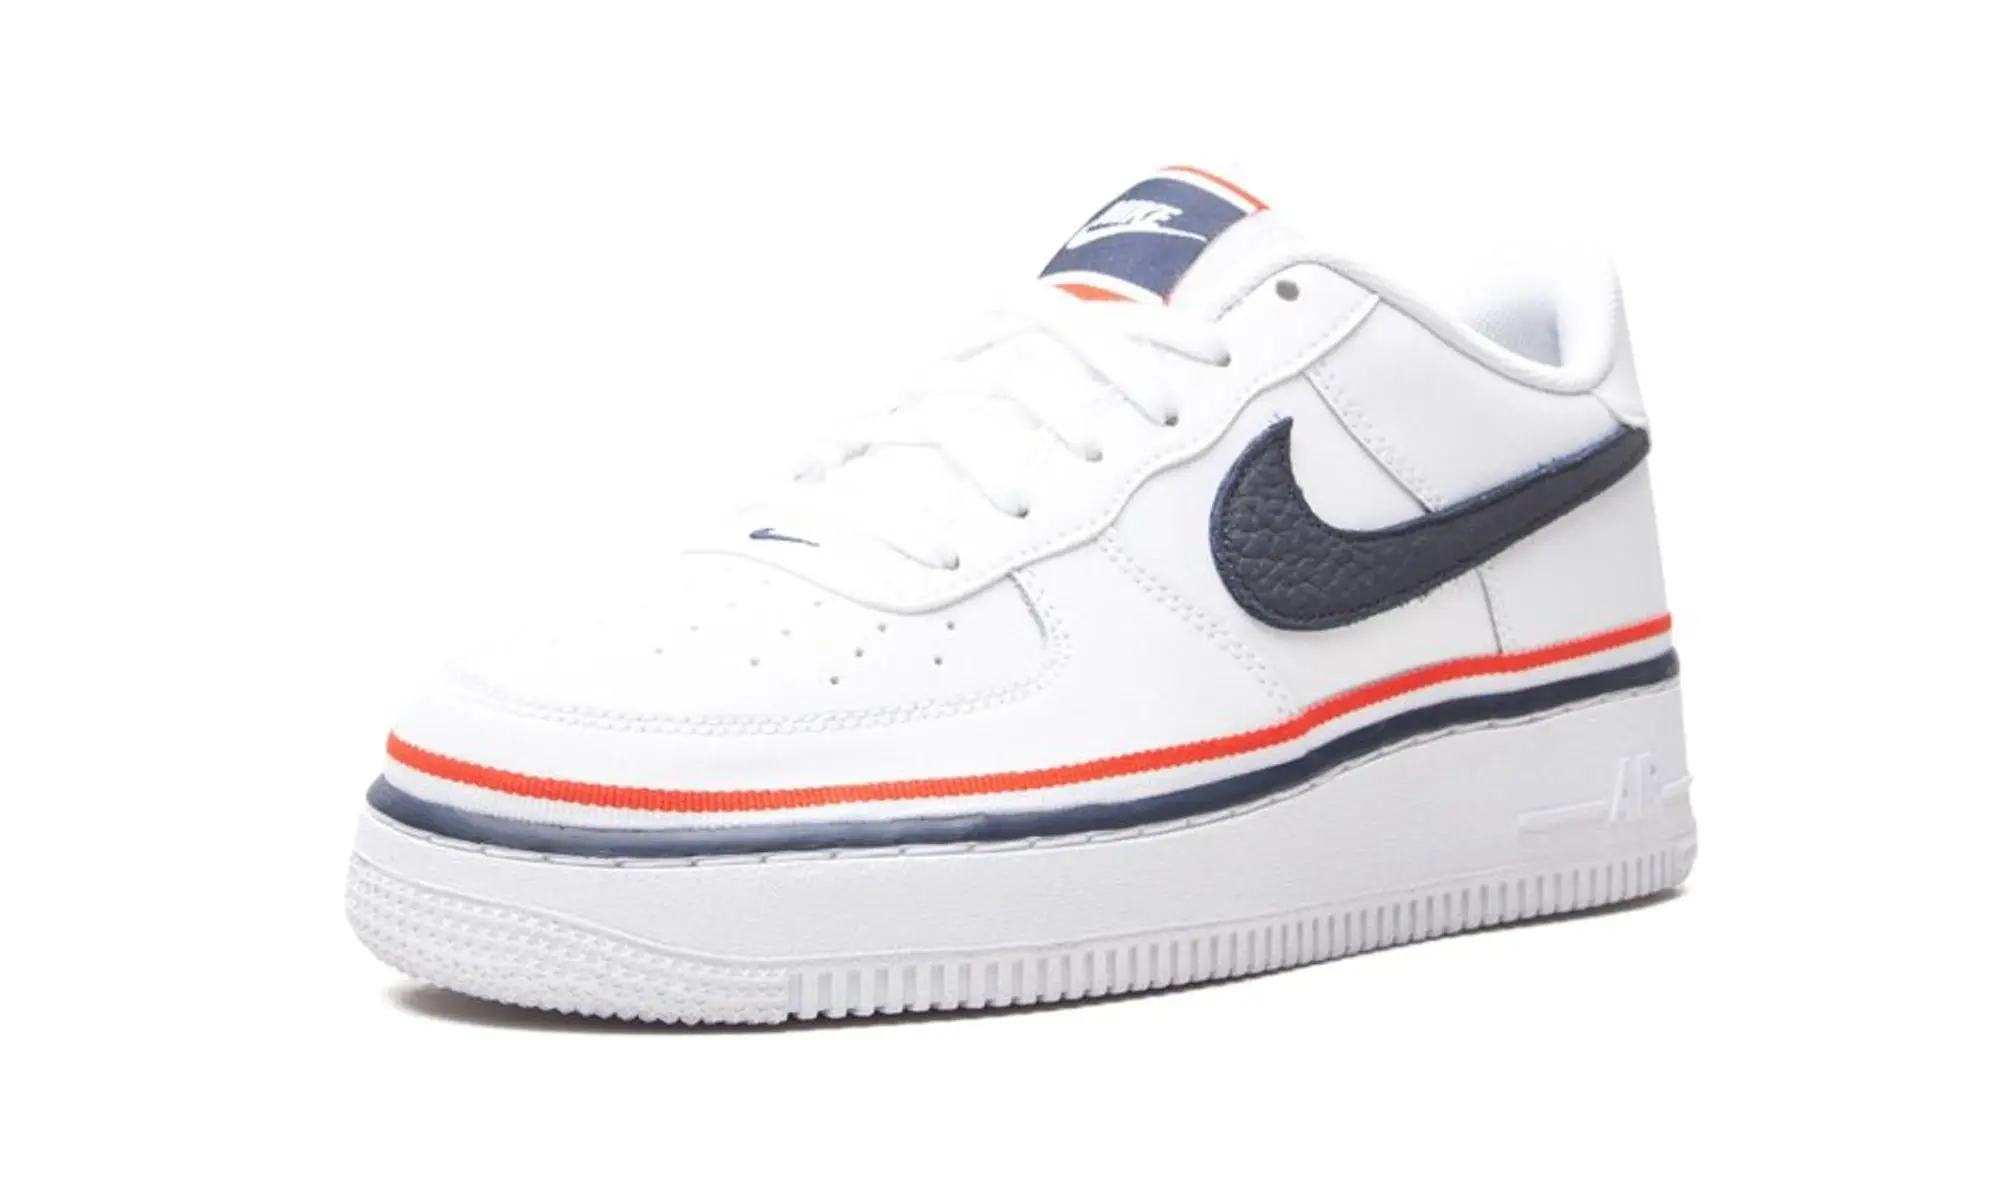 Nike Kids Air Force 1 LV8 1 (GS) Shoes